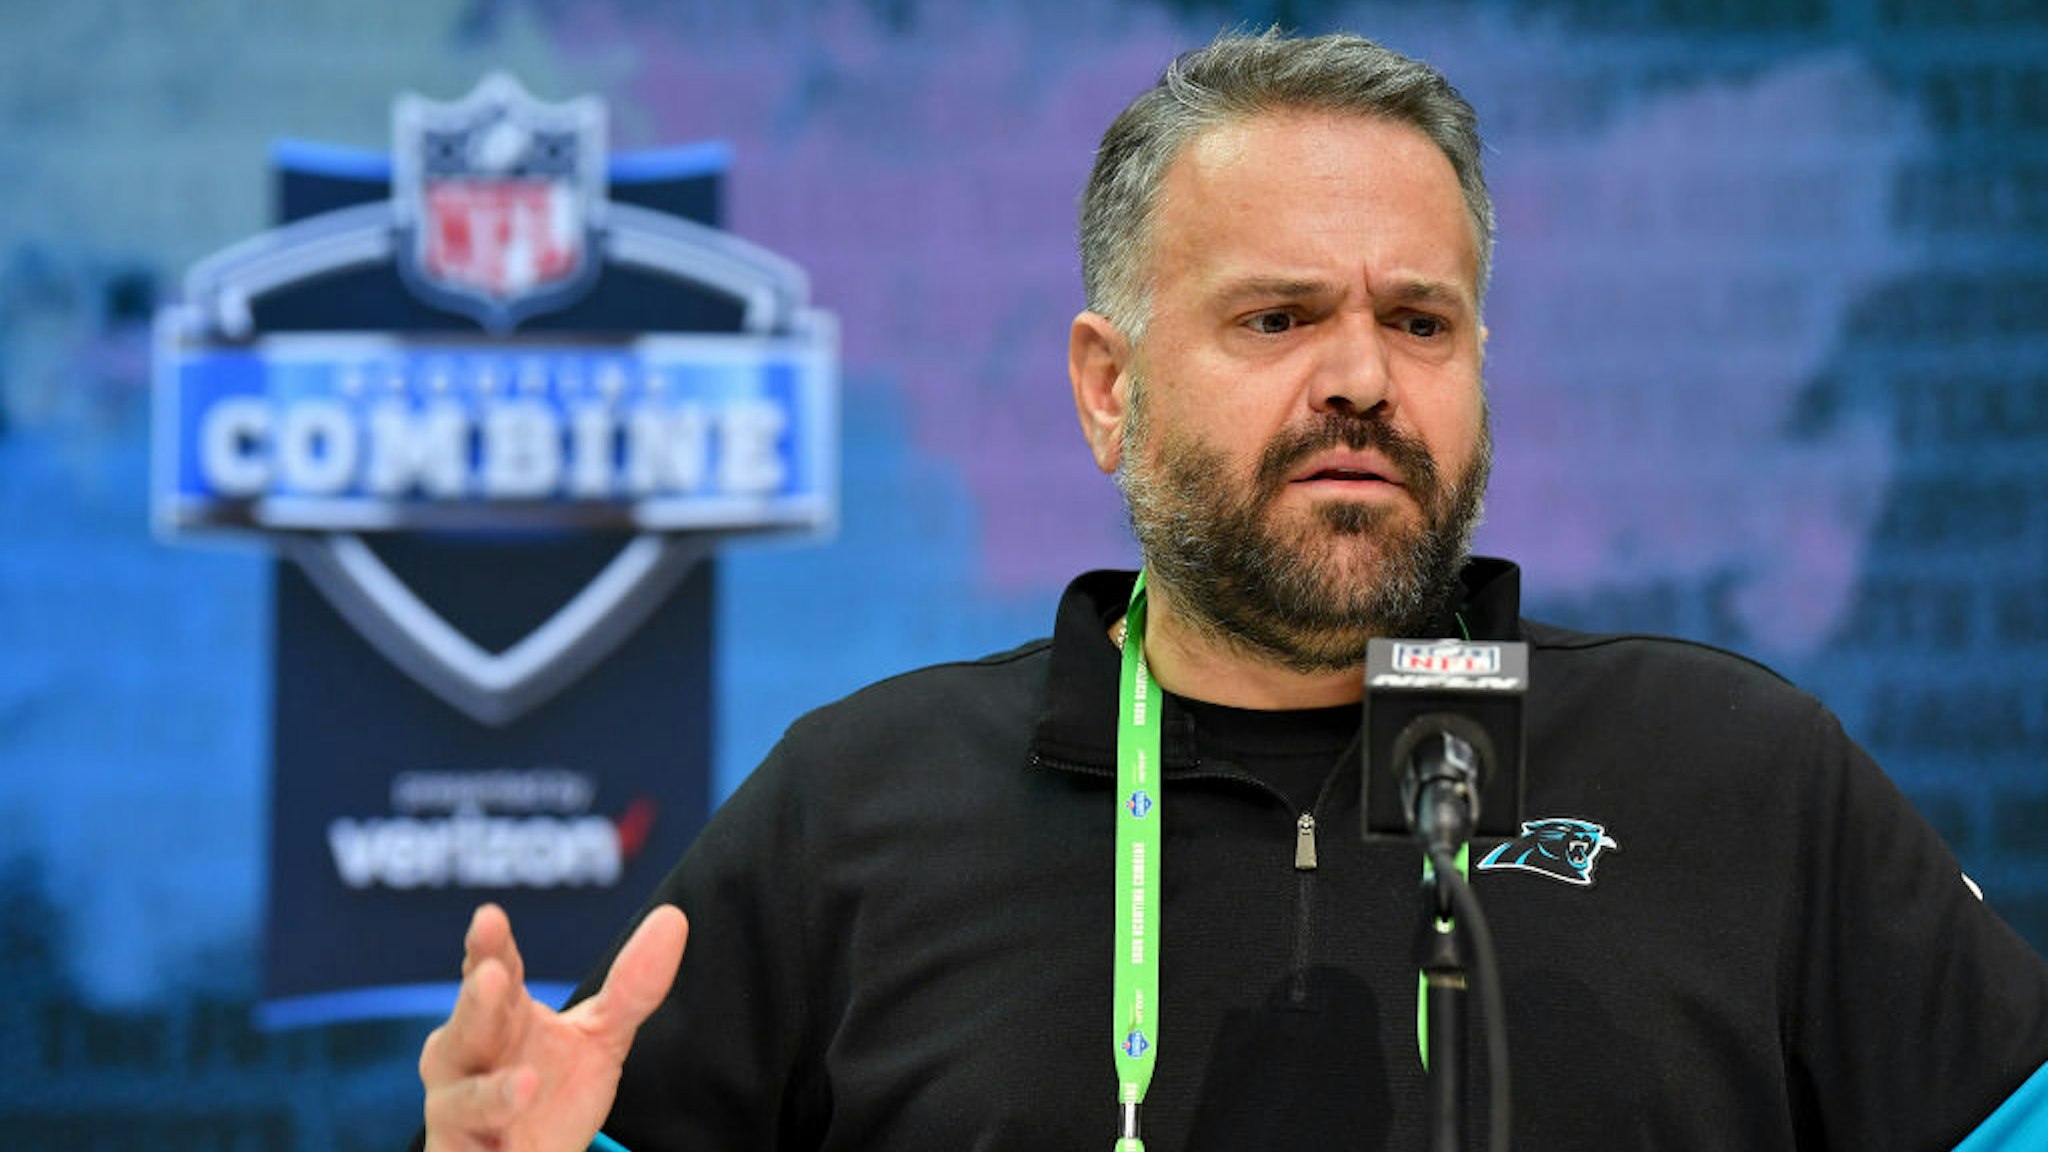 Head coach Matt Rhule of the Carolina Panthers interviews during the first day of the NFL Scouting Combine at Lucas Oil Stadium on February 25, 2020 in Indianapolis, Indiana.